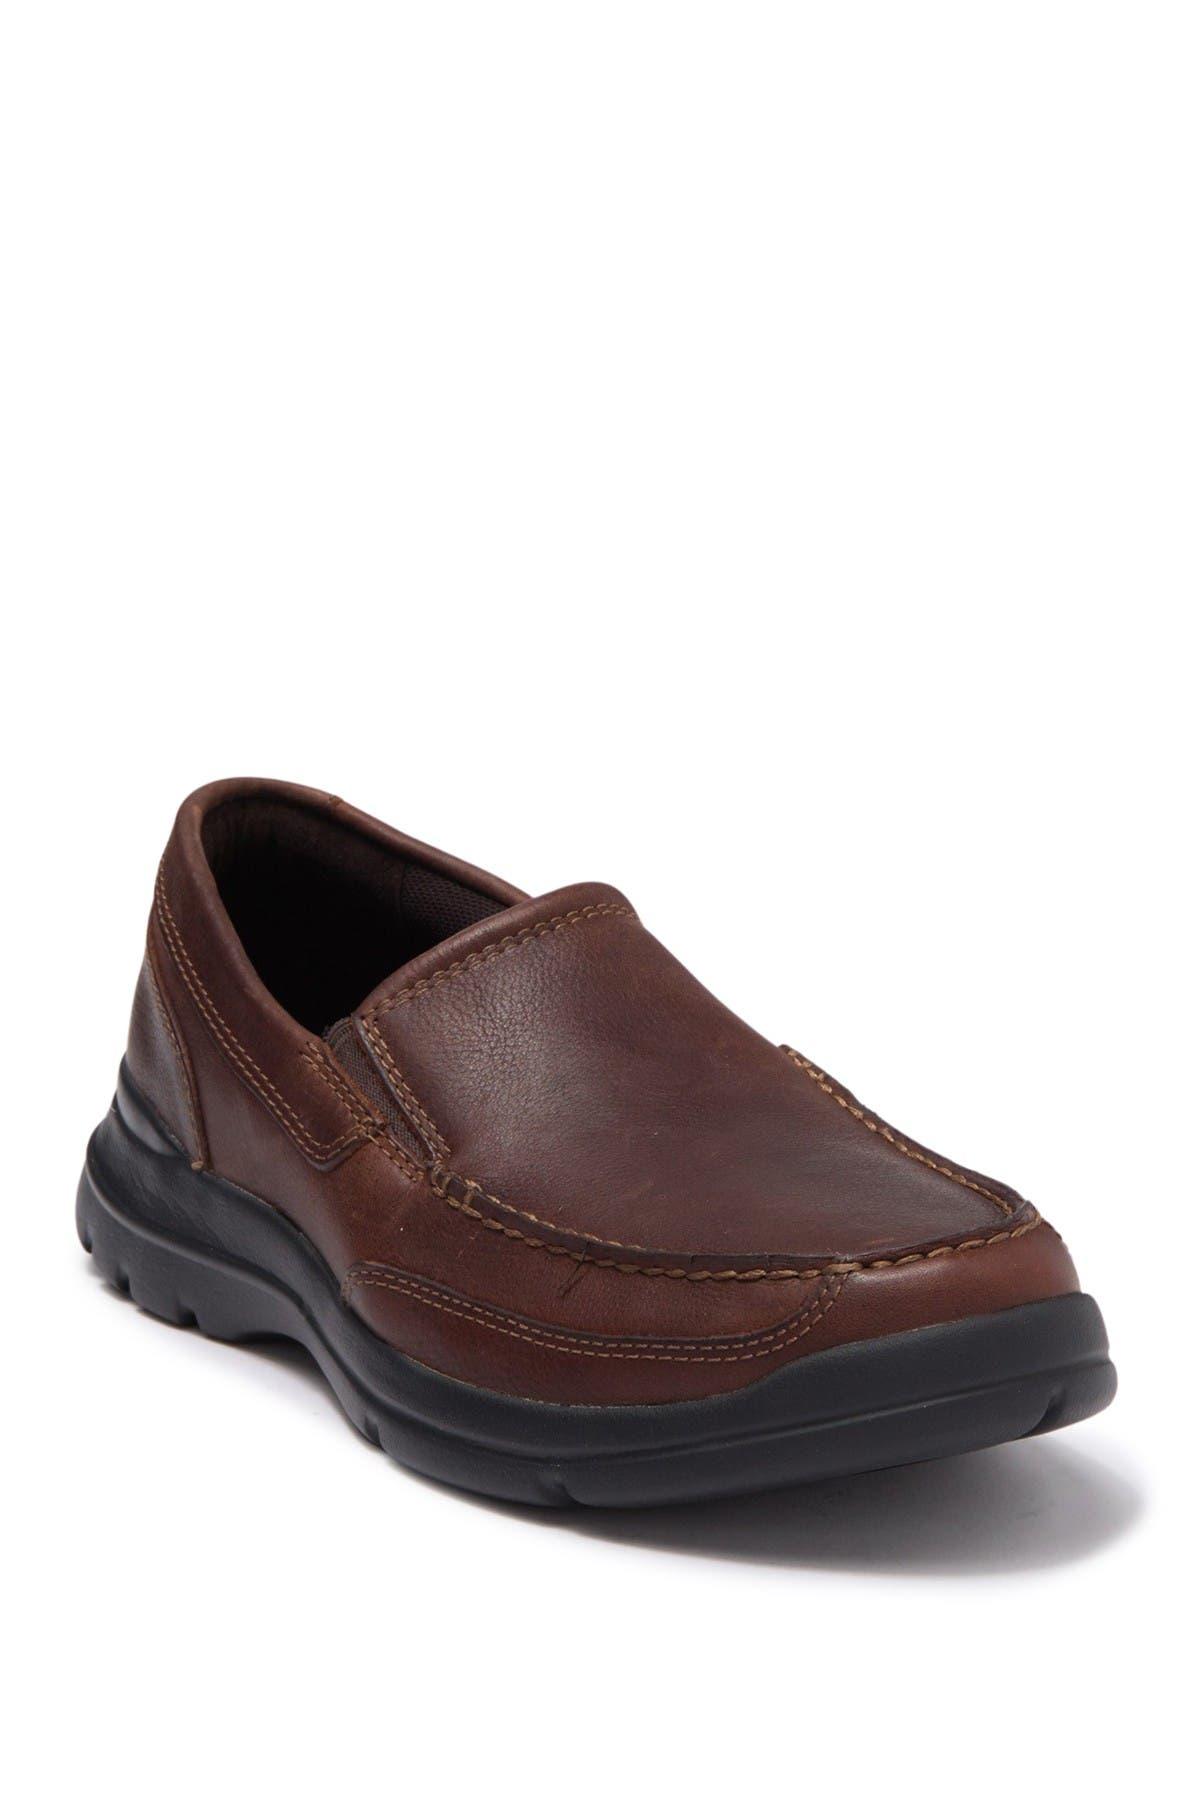 Rockport Leather Junction Slip-on Sneaker in Chocolate (Brown) for Men -  Save 59% - Lyst